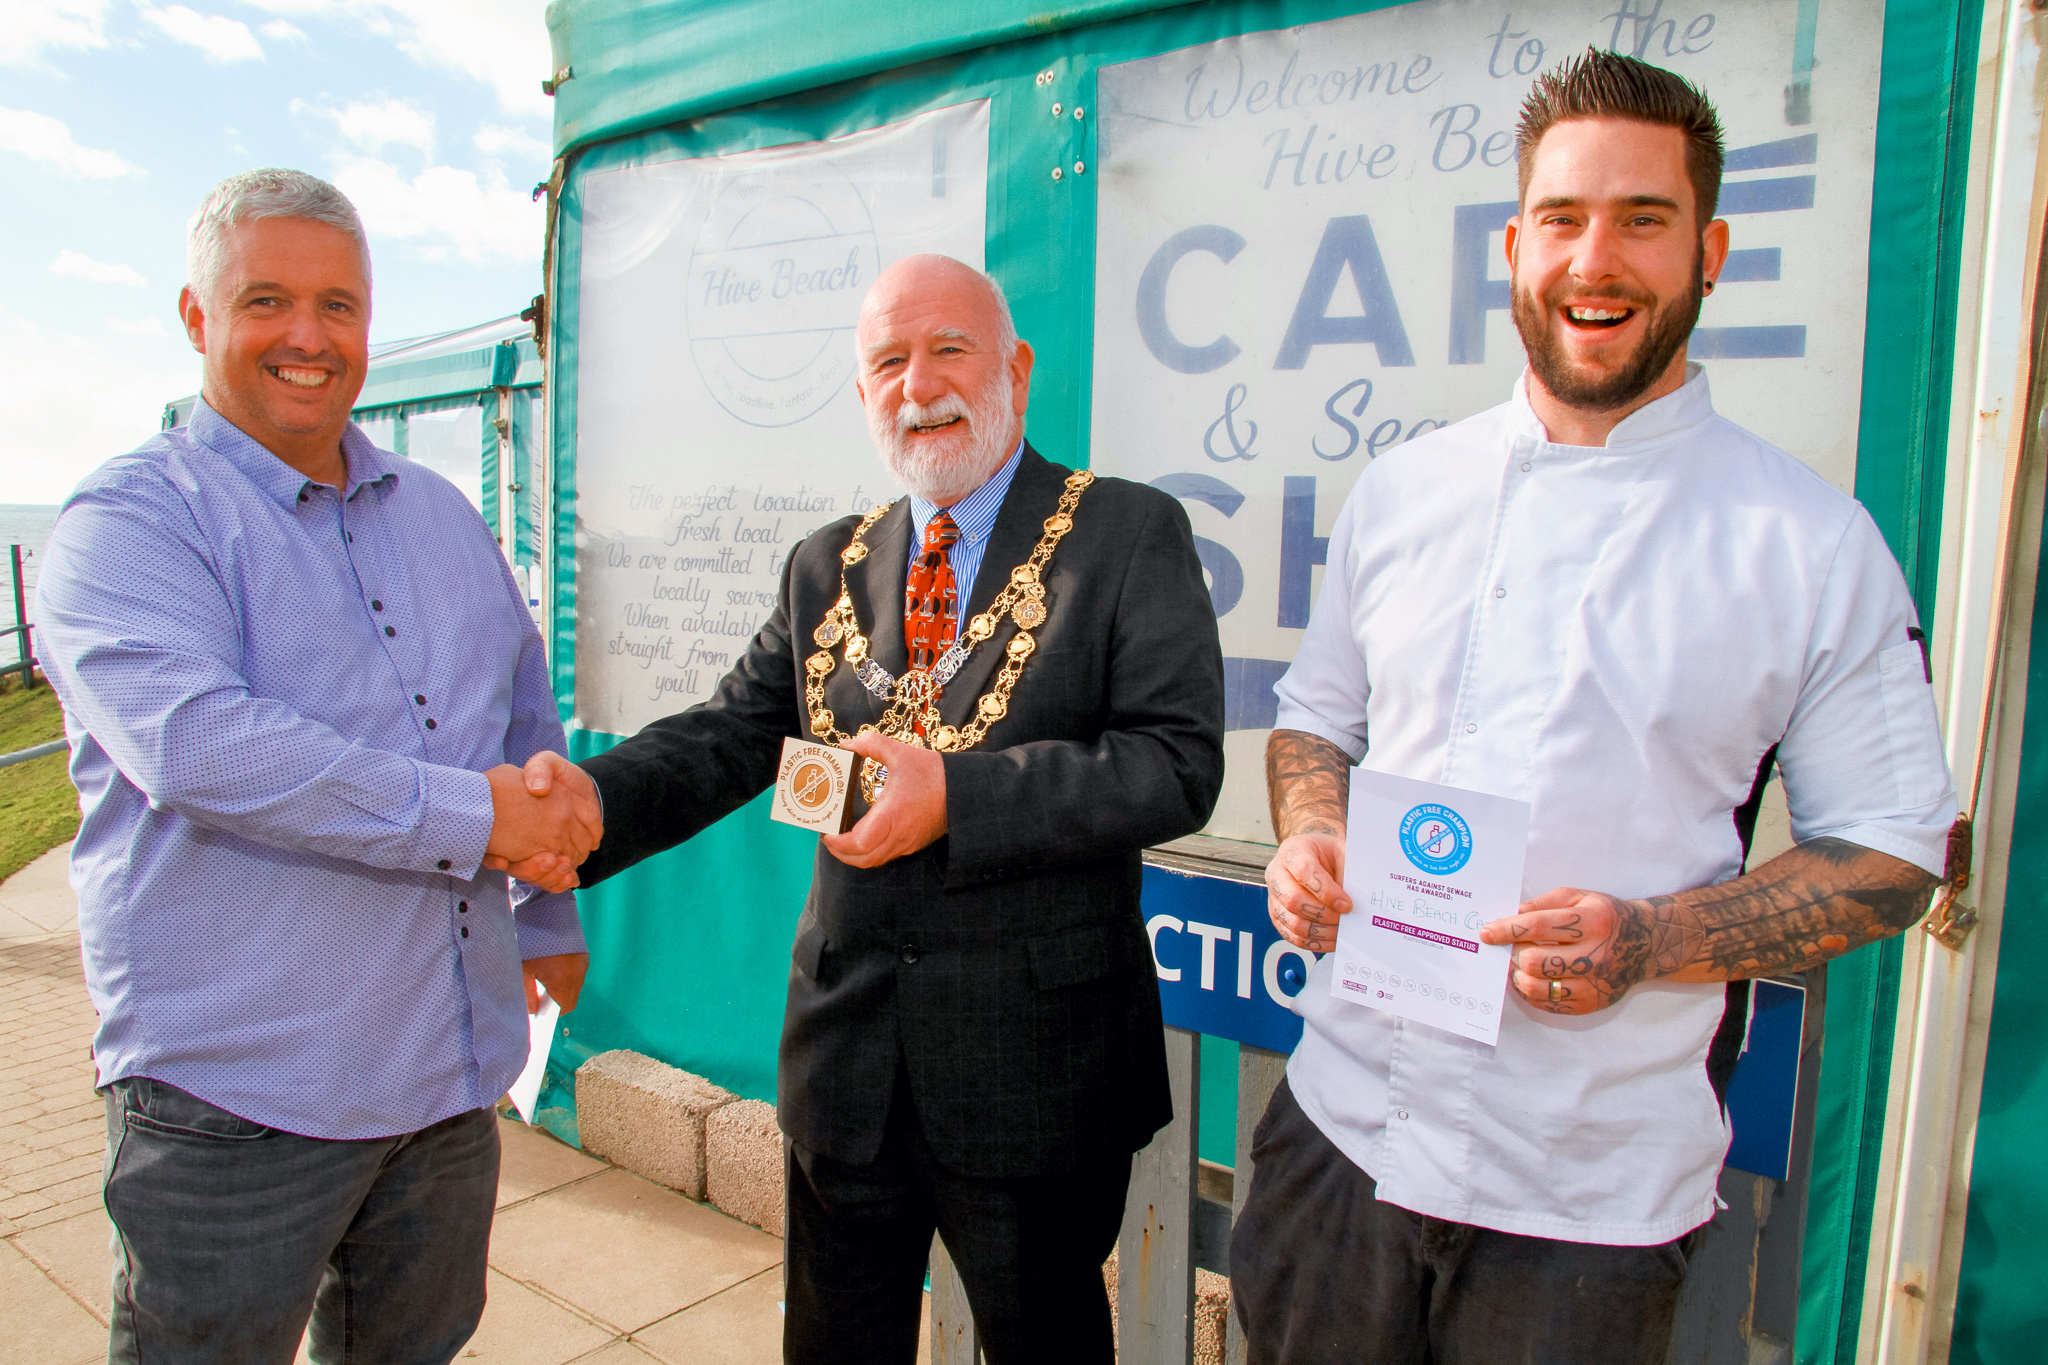 The Hive Beach Cafe was pleased to be named a Plastic Free Champion in 2022, with the award presented by the Mayor of Bridport Cllr Ian Bark